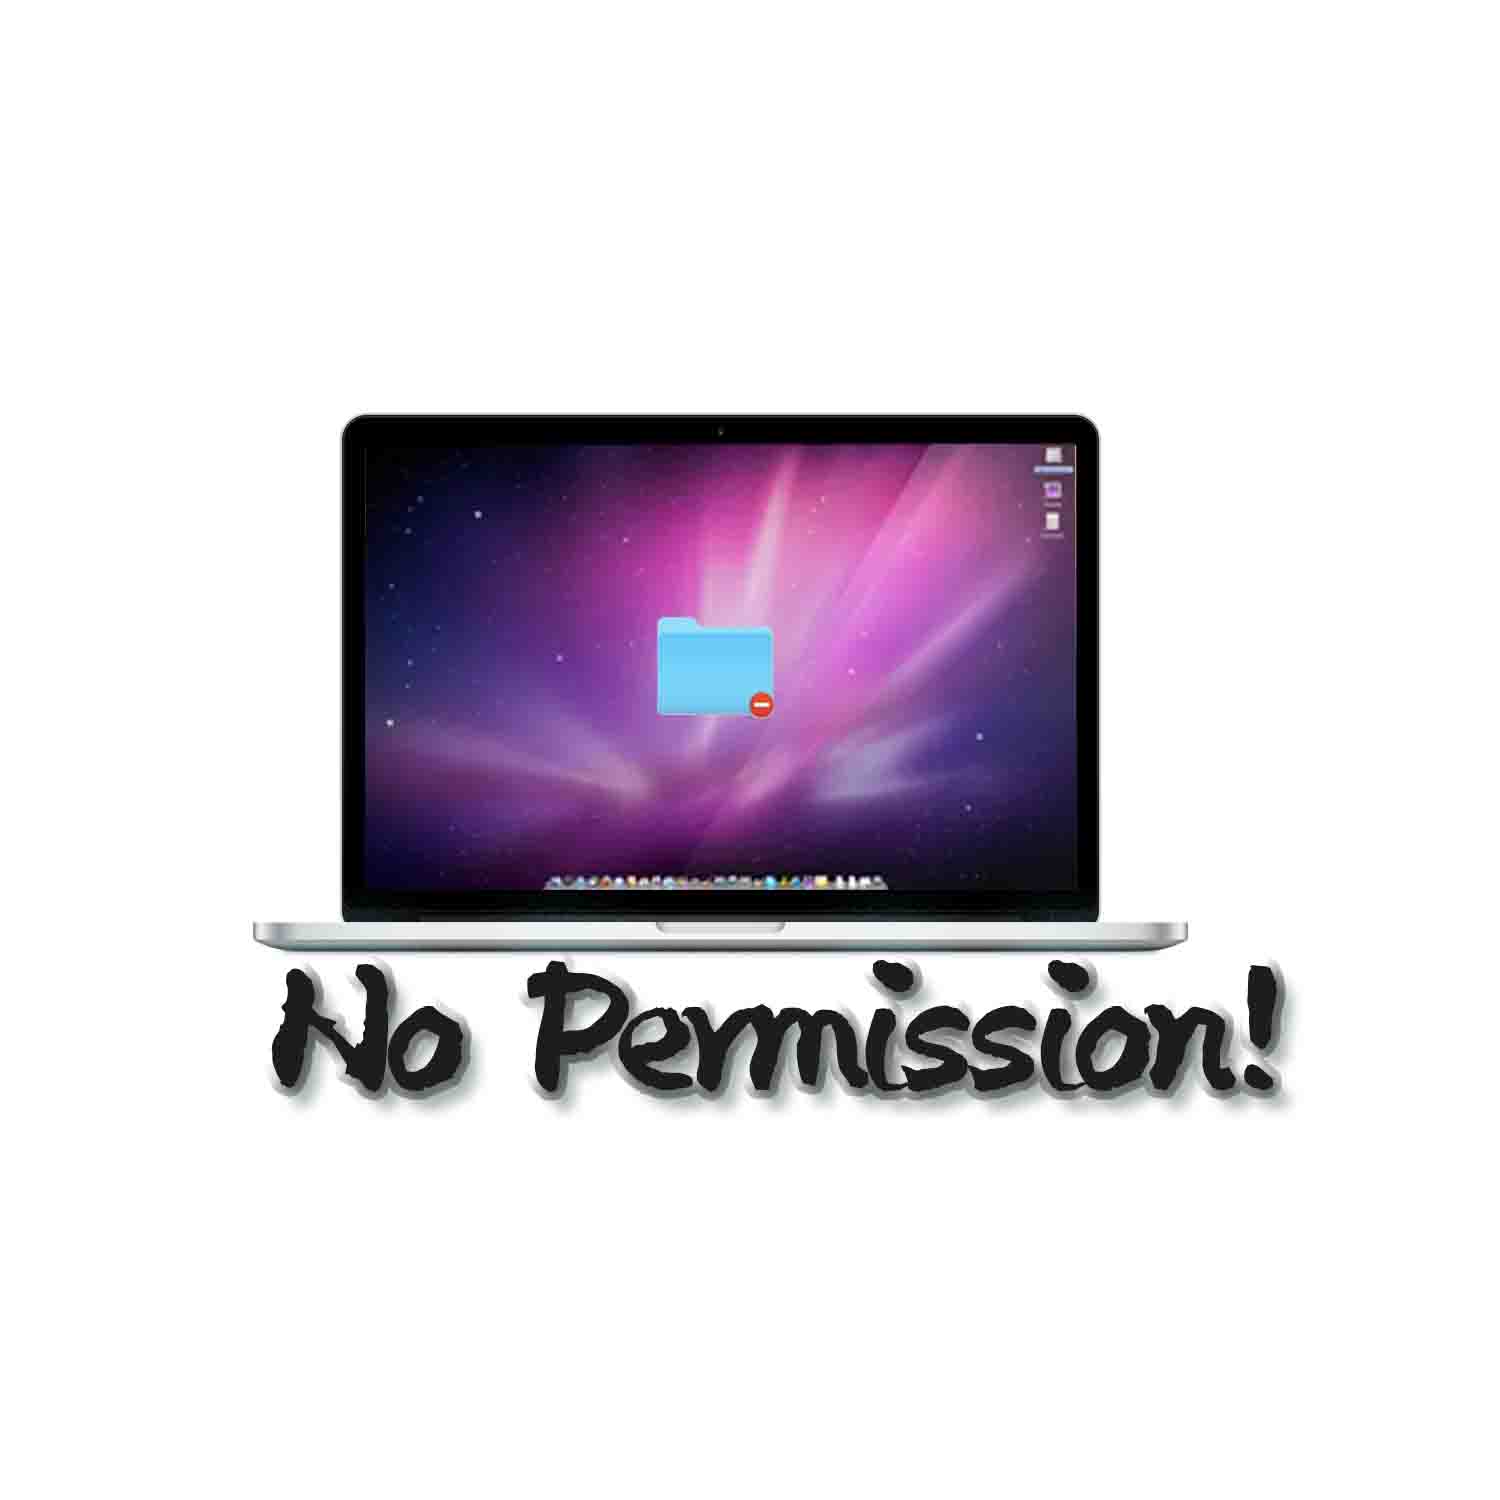 You Don’t Have Permission in macOS When Installing Driver